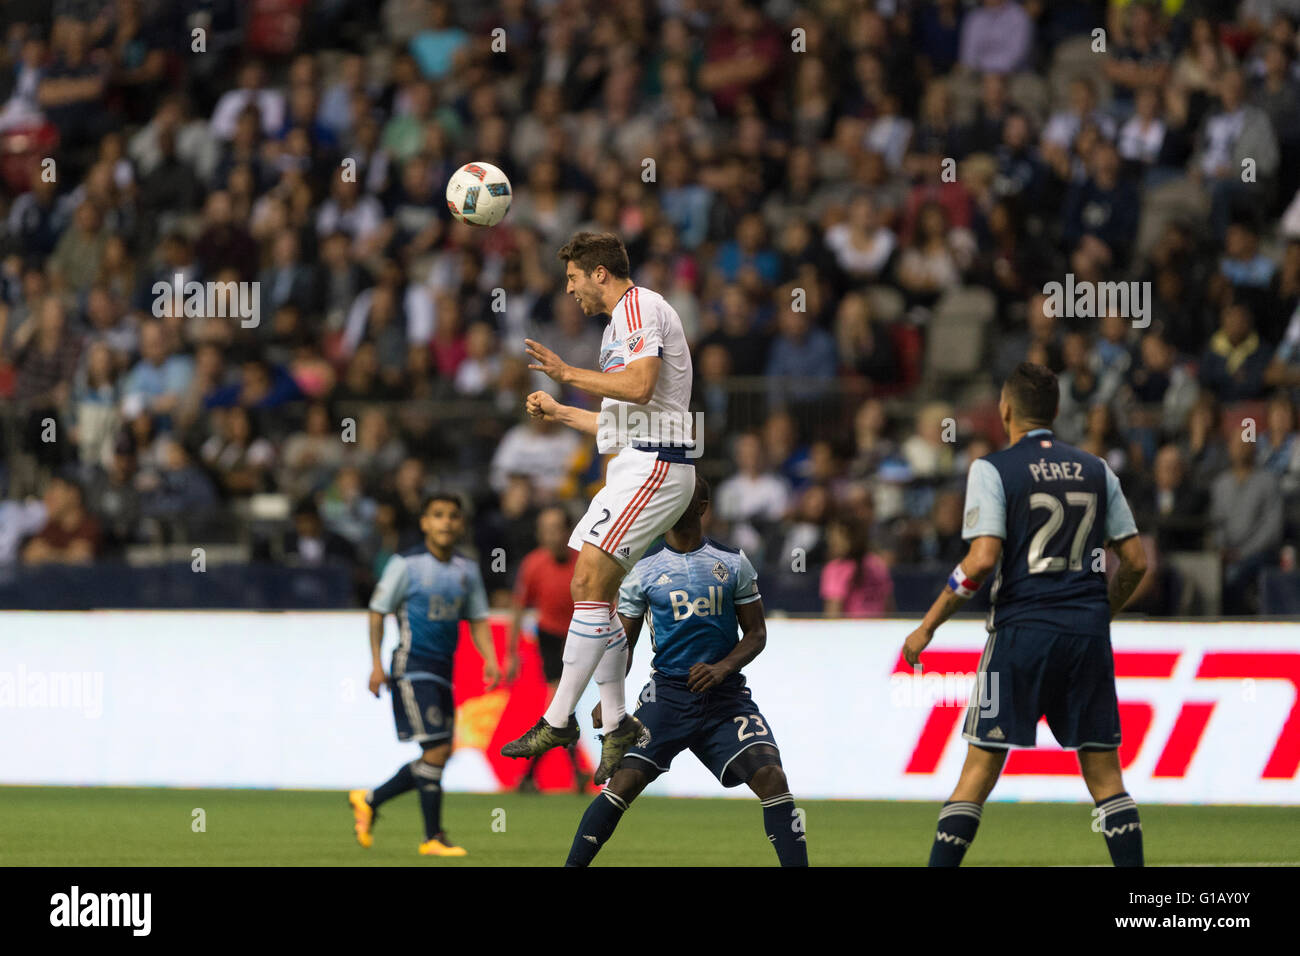 Vancouver, Canada. 11 Maggio, 2016. Vancouver Whitecaps vs Chicago Fire, BC Place Stadium. Credito: Gerry Rousseau/Alamy Live News Foto Stock